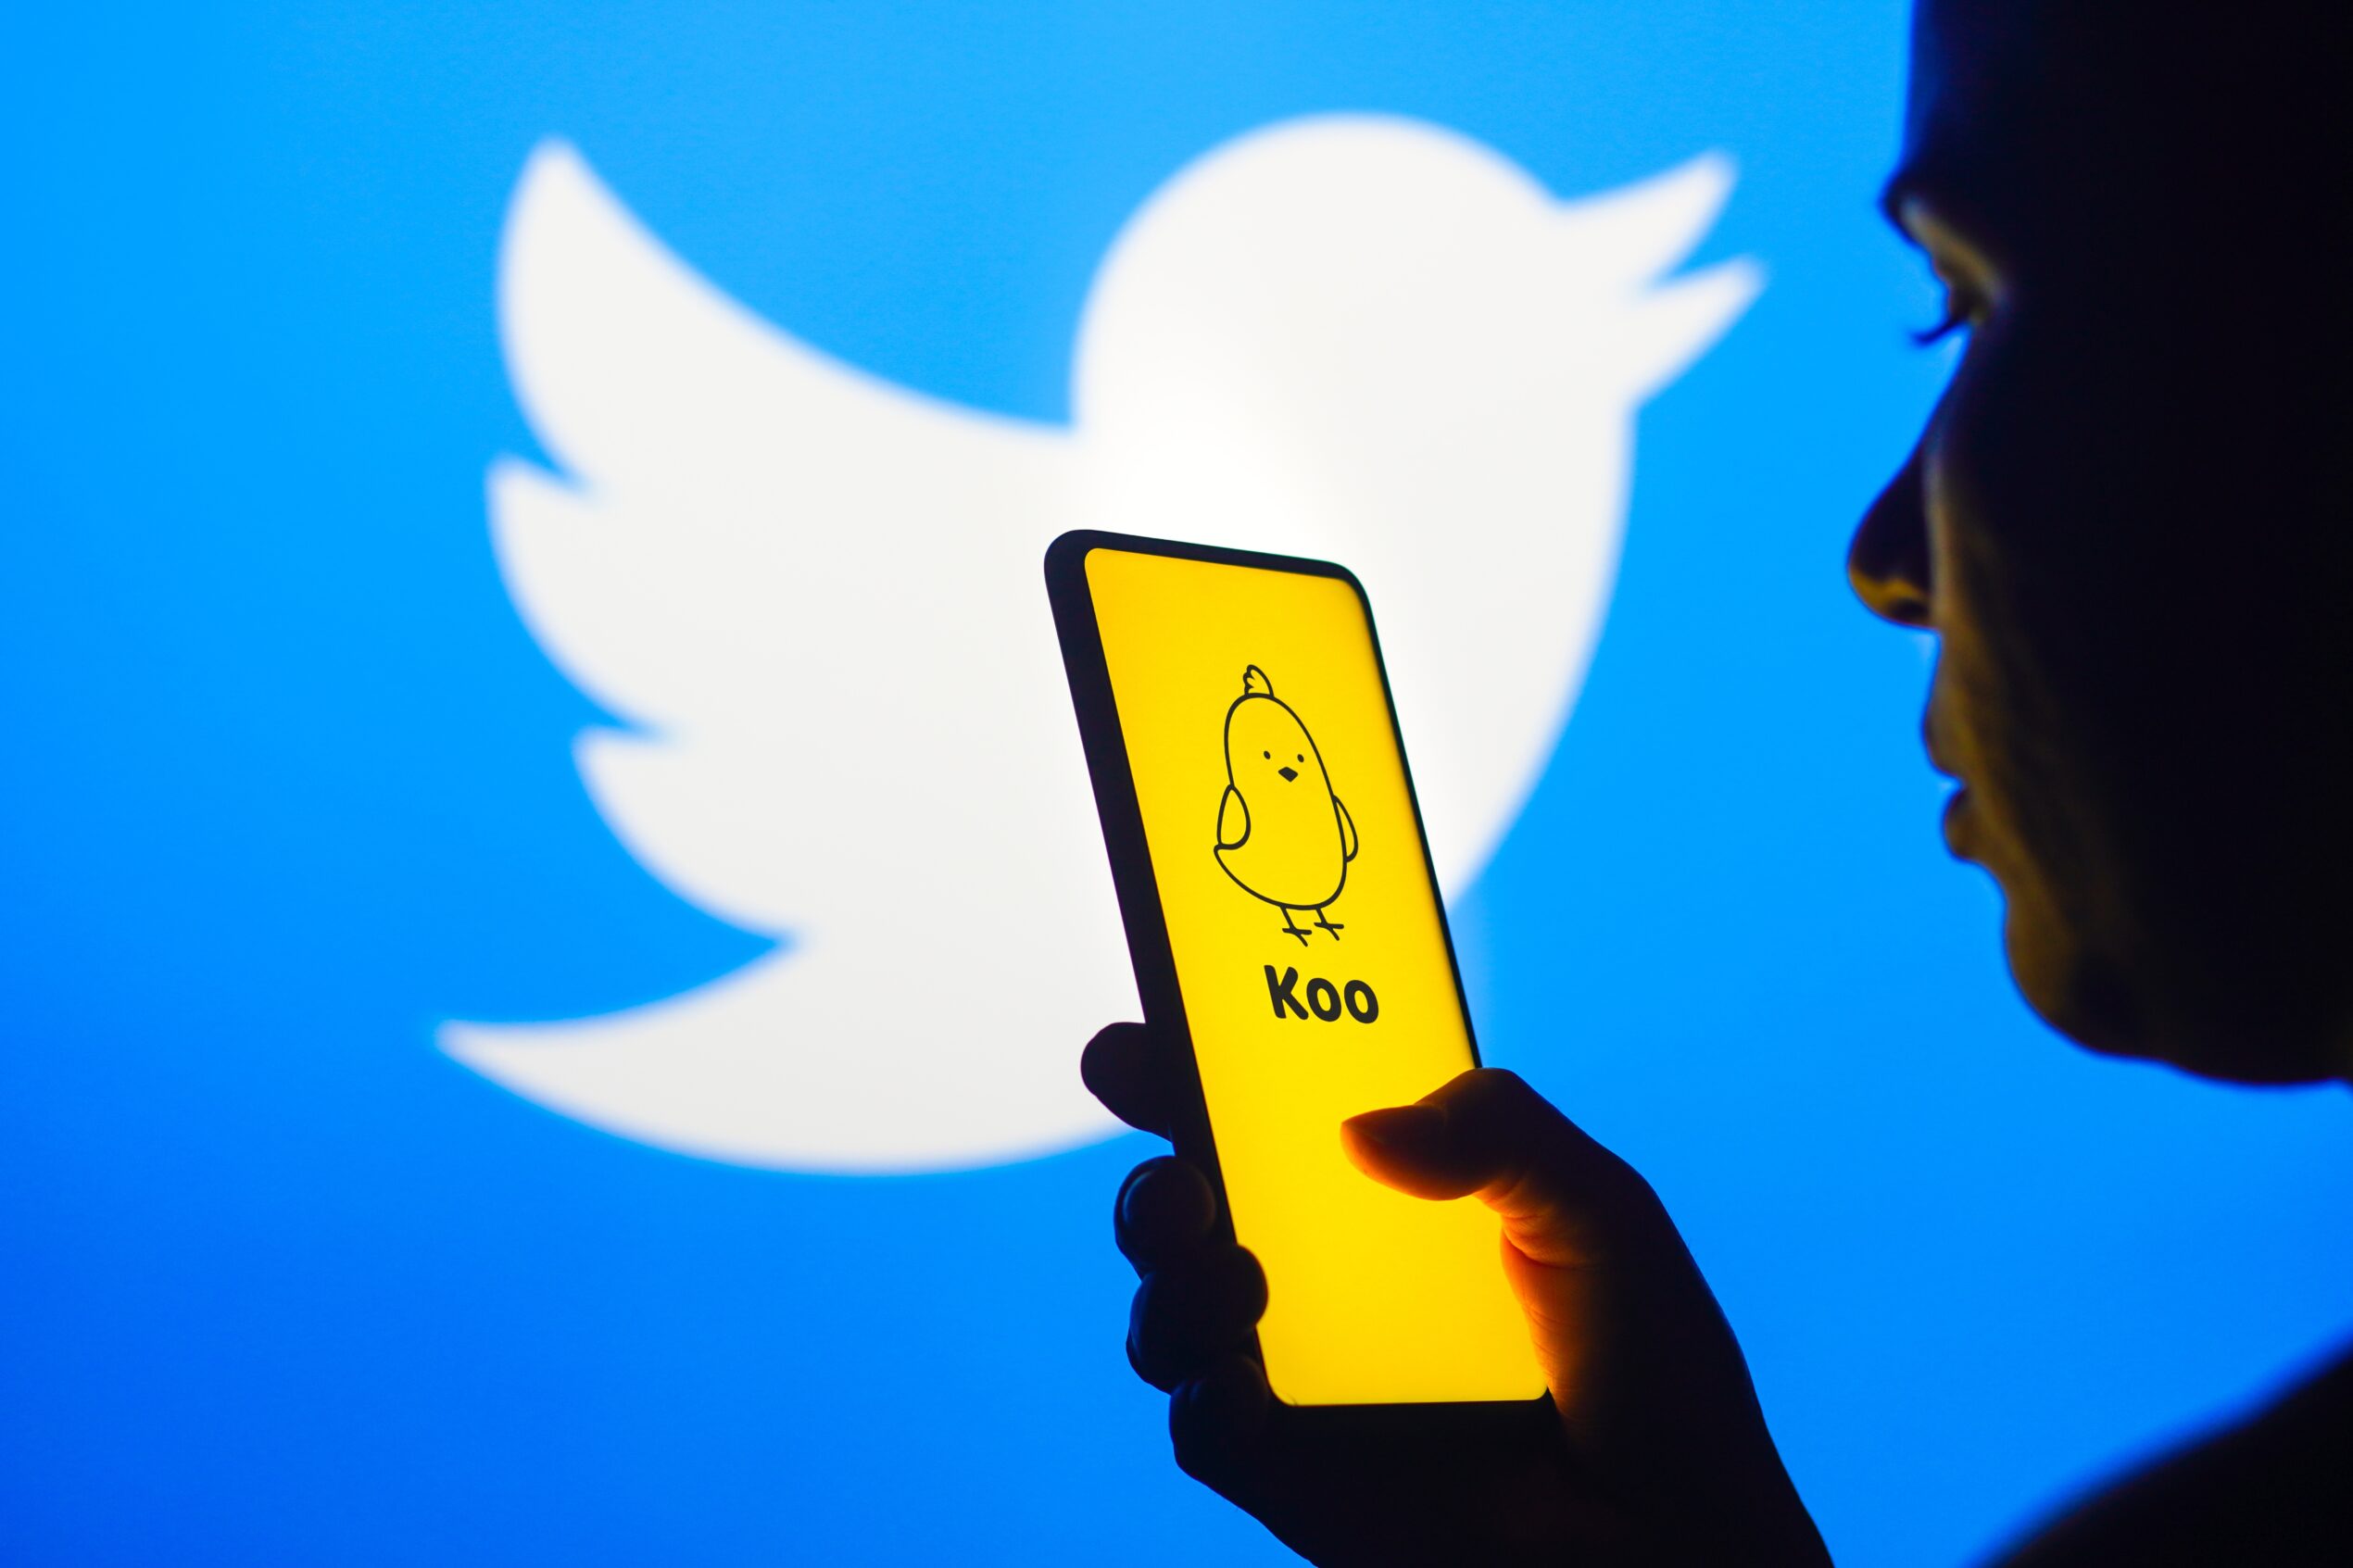 Twitter Competitor Koo Targets More Users With ChatGPT Integration